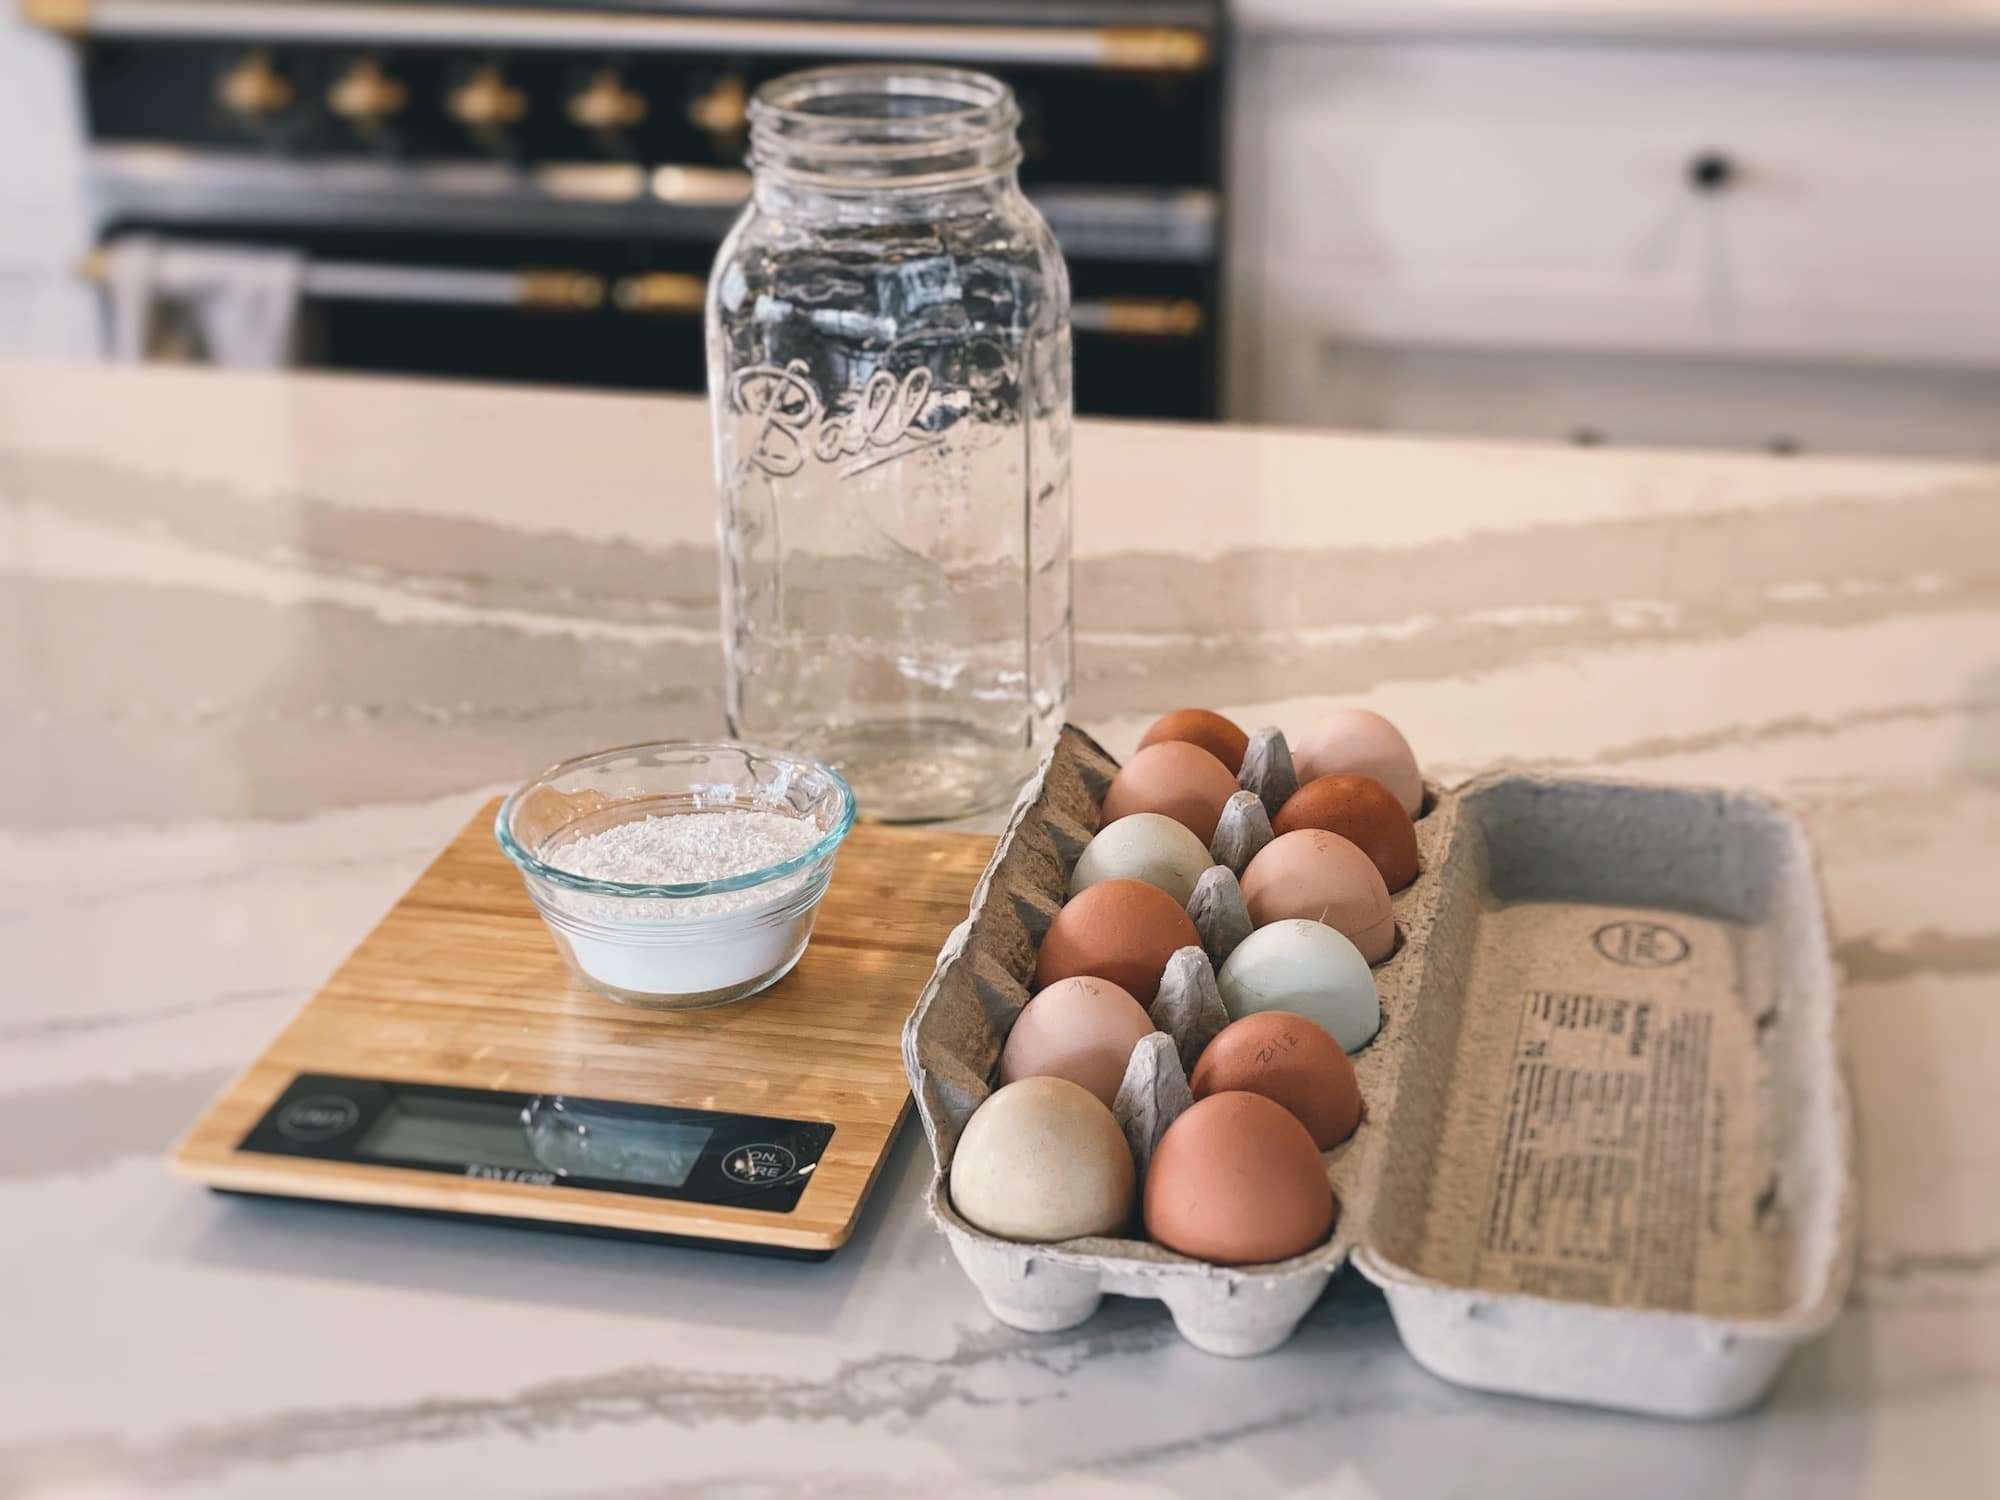 Supplies laid out on a kitchen counter for water glassing eggs